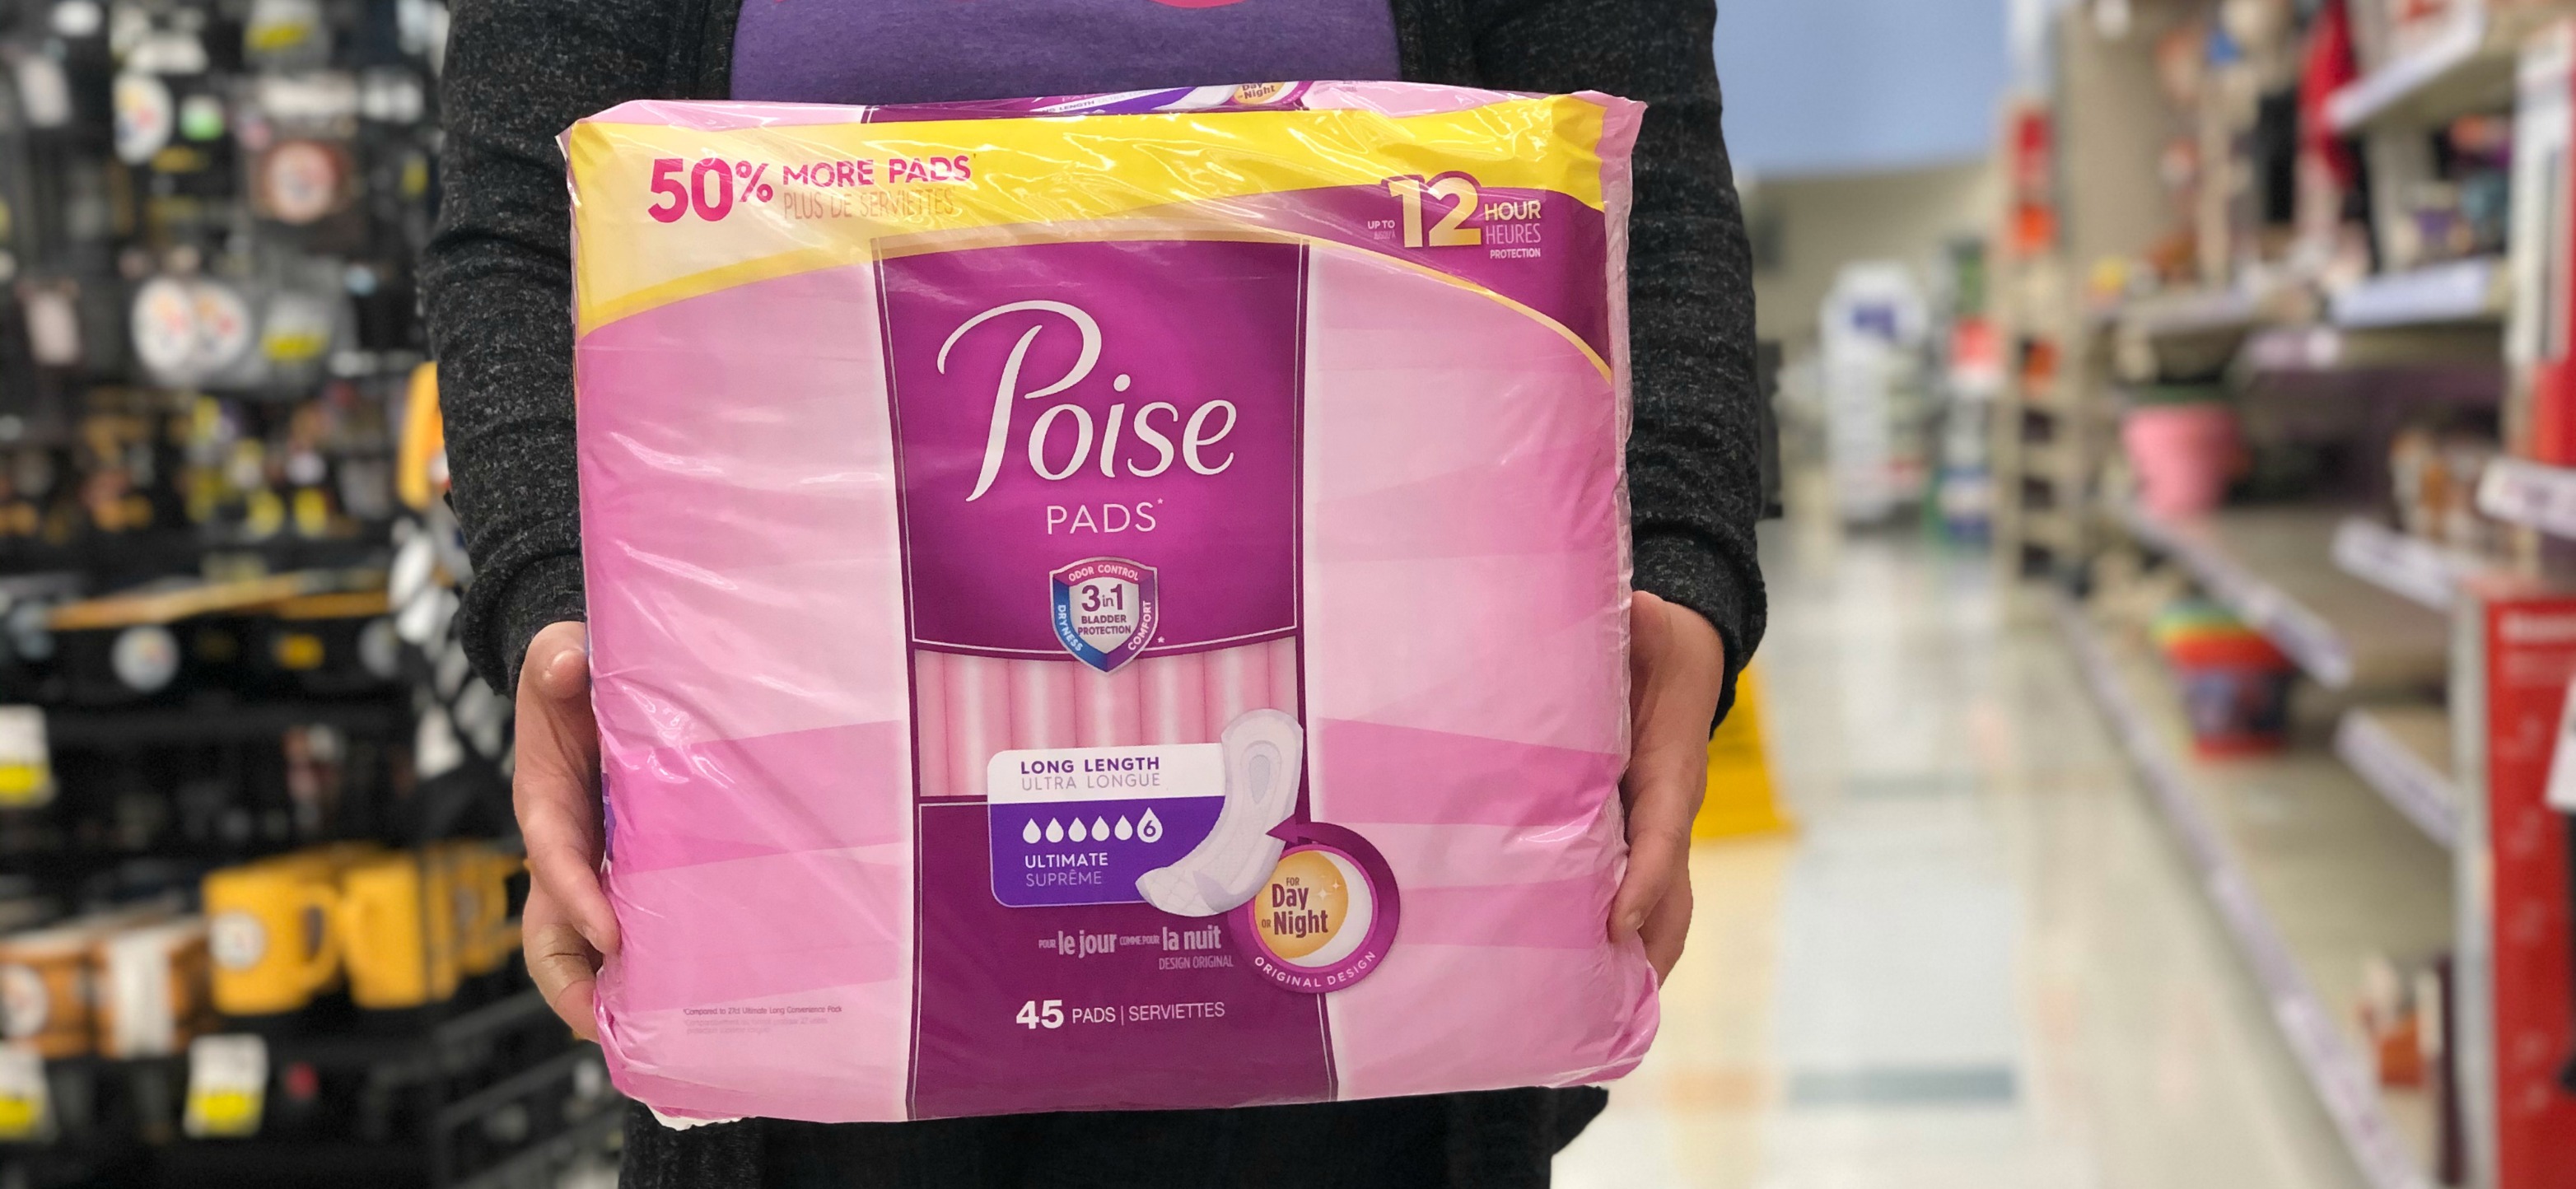 BIG Savings on Depend Underwear and Poise Pads at Kroger